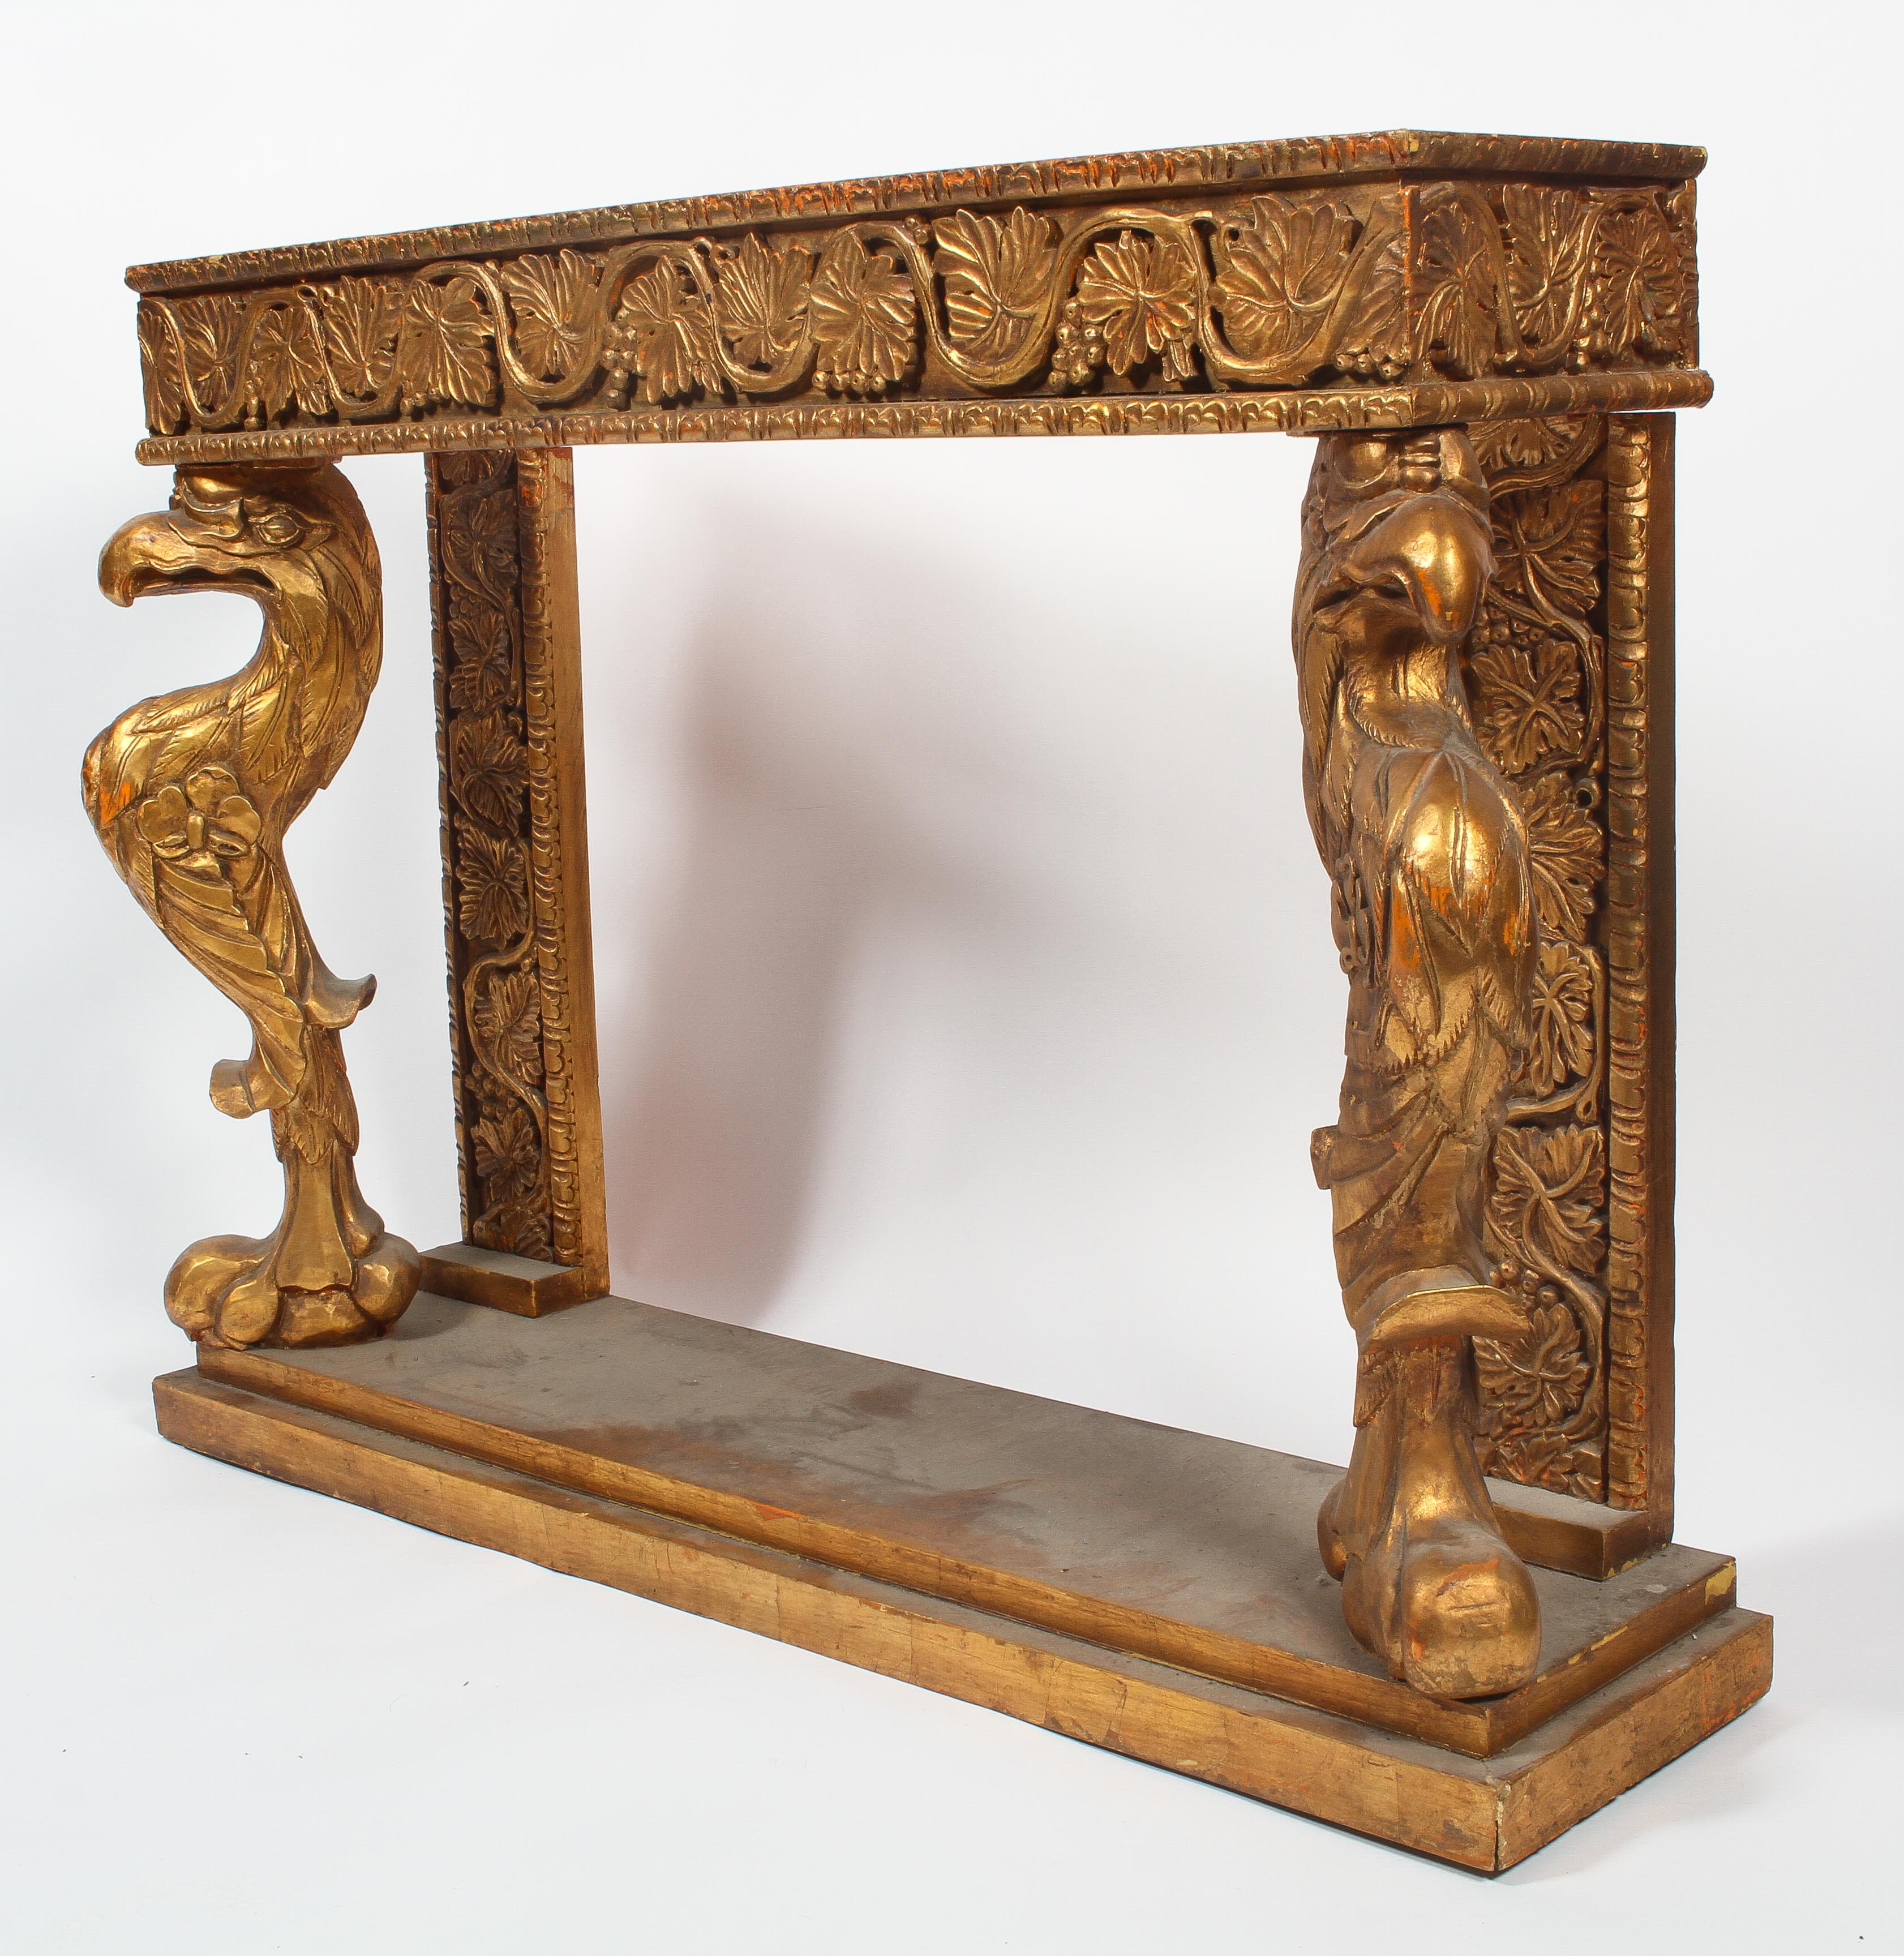 A gilt wood console table, in the manner of William Kent, with two eagle mono podae, - Image 2 of 2